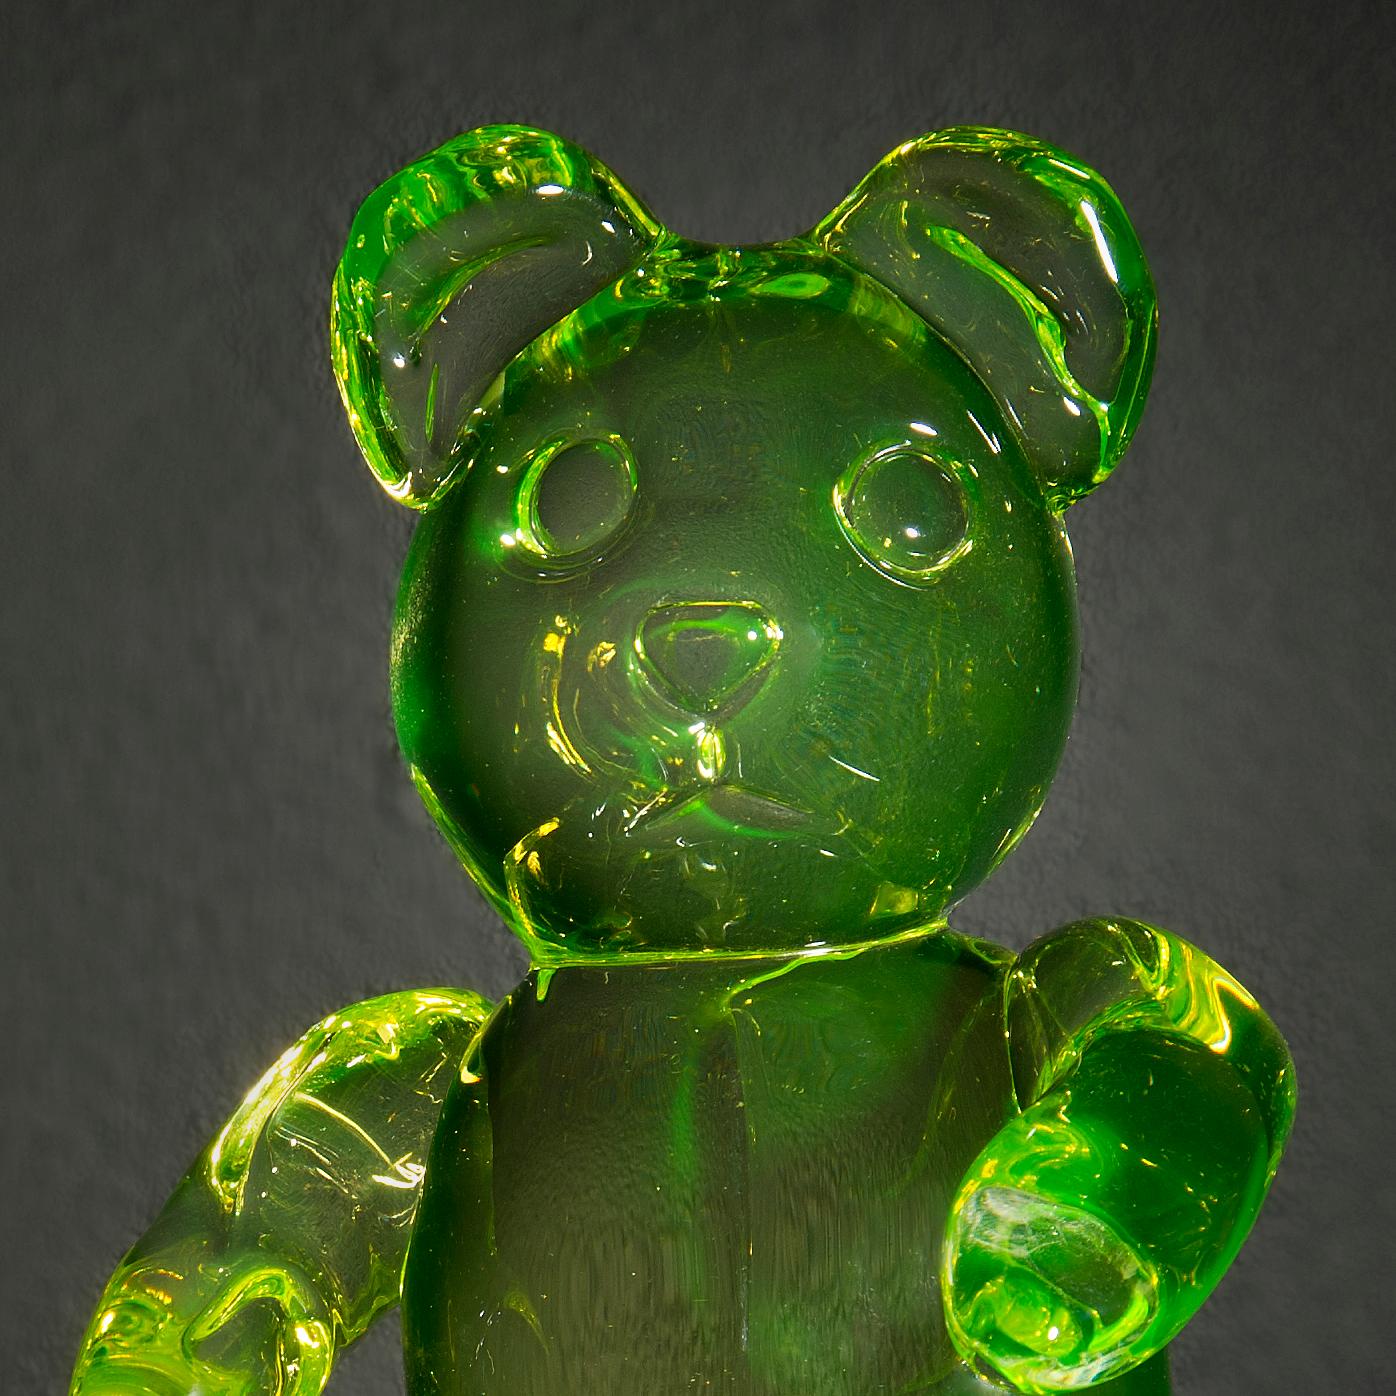 Bear, a unique lime green glass sculpted animal figurine by Elliot Walker 2